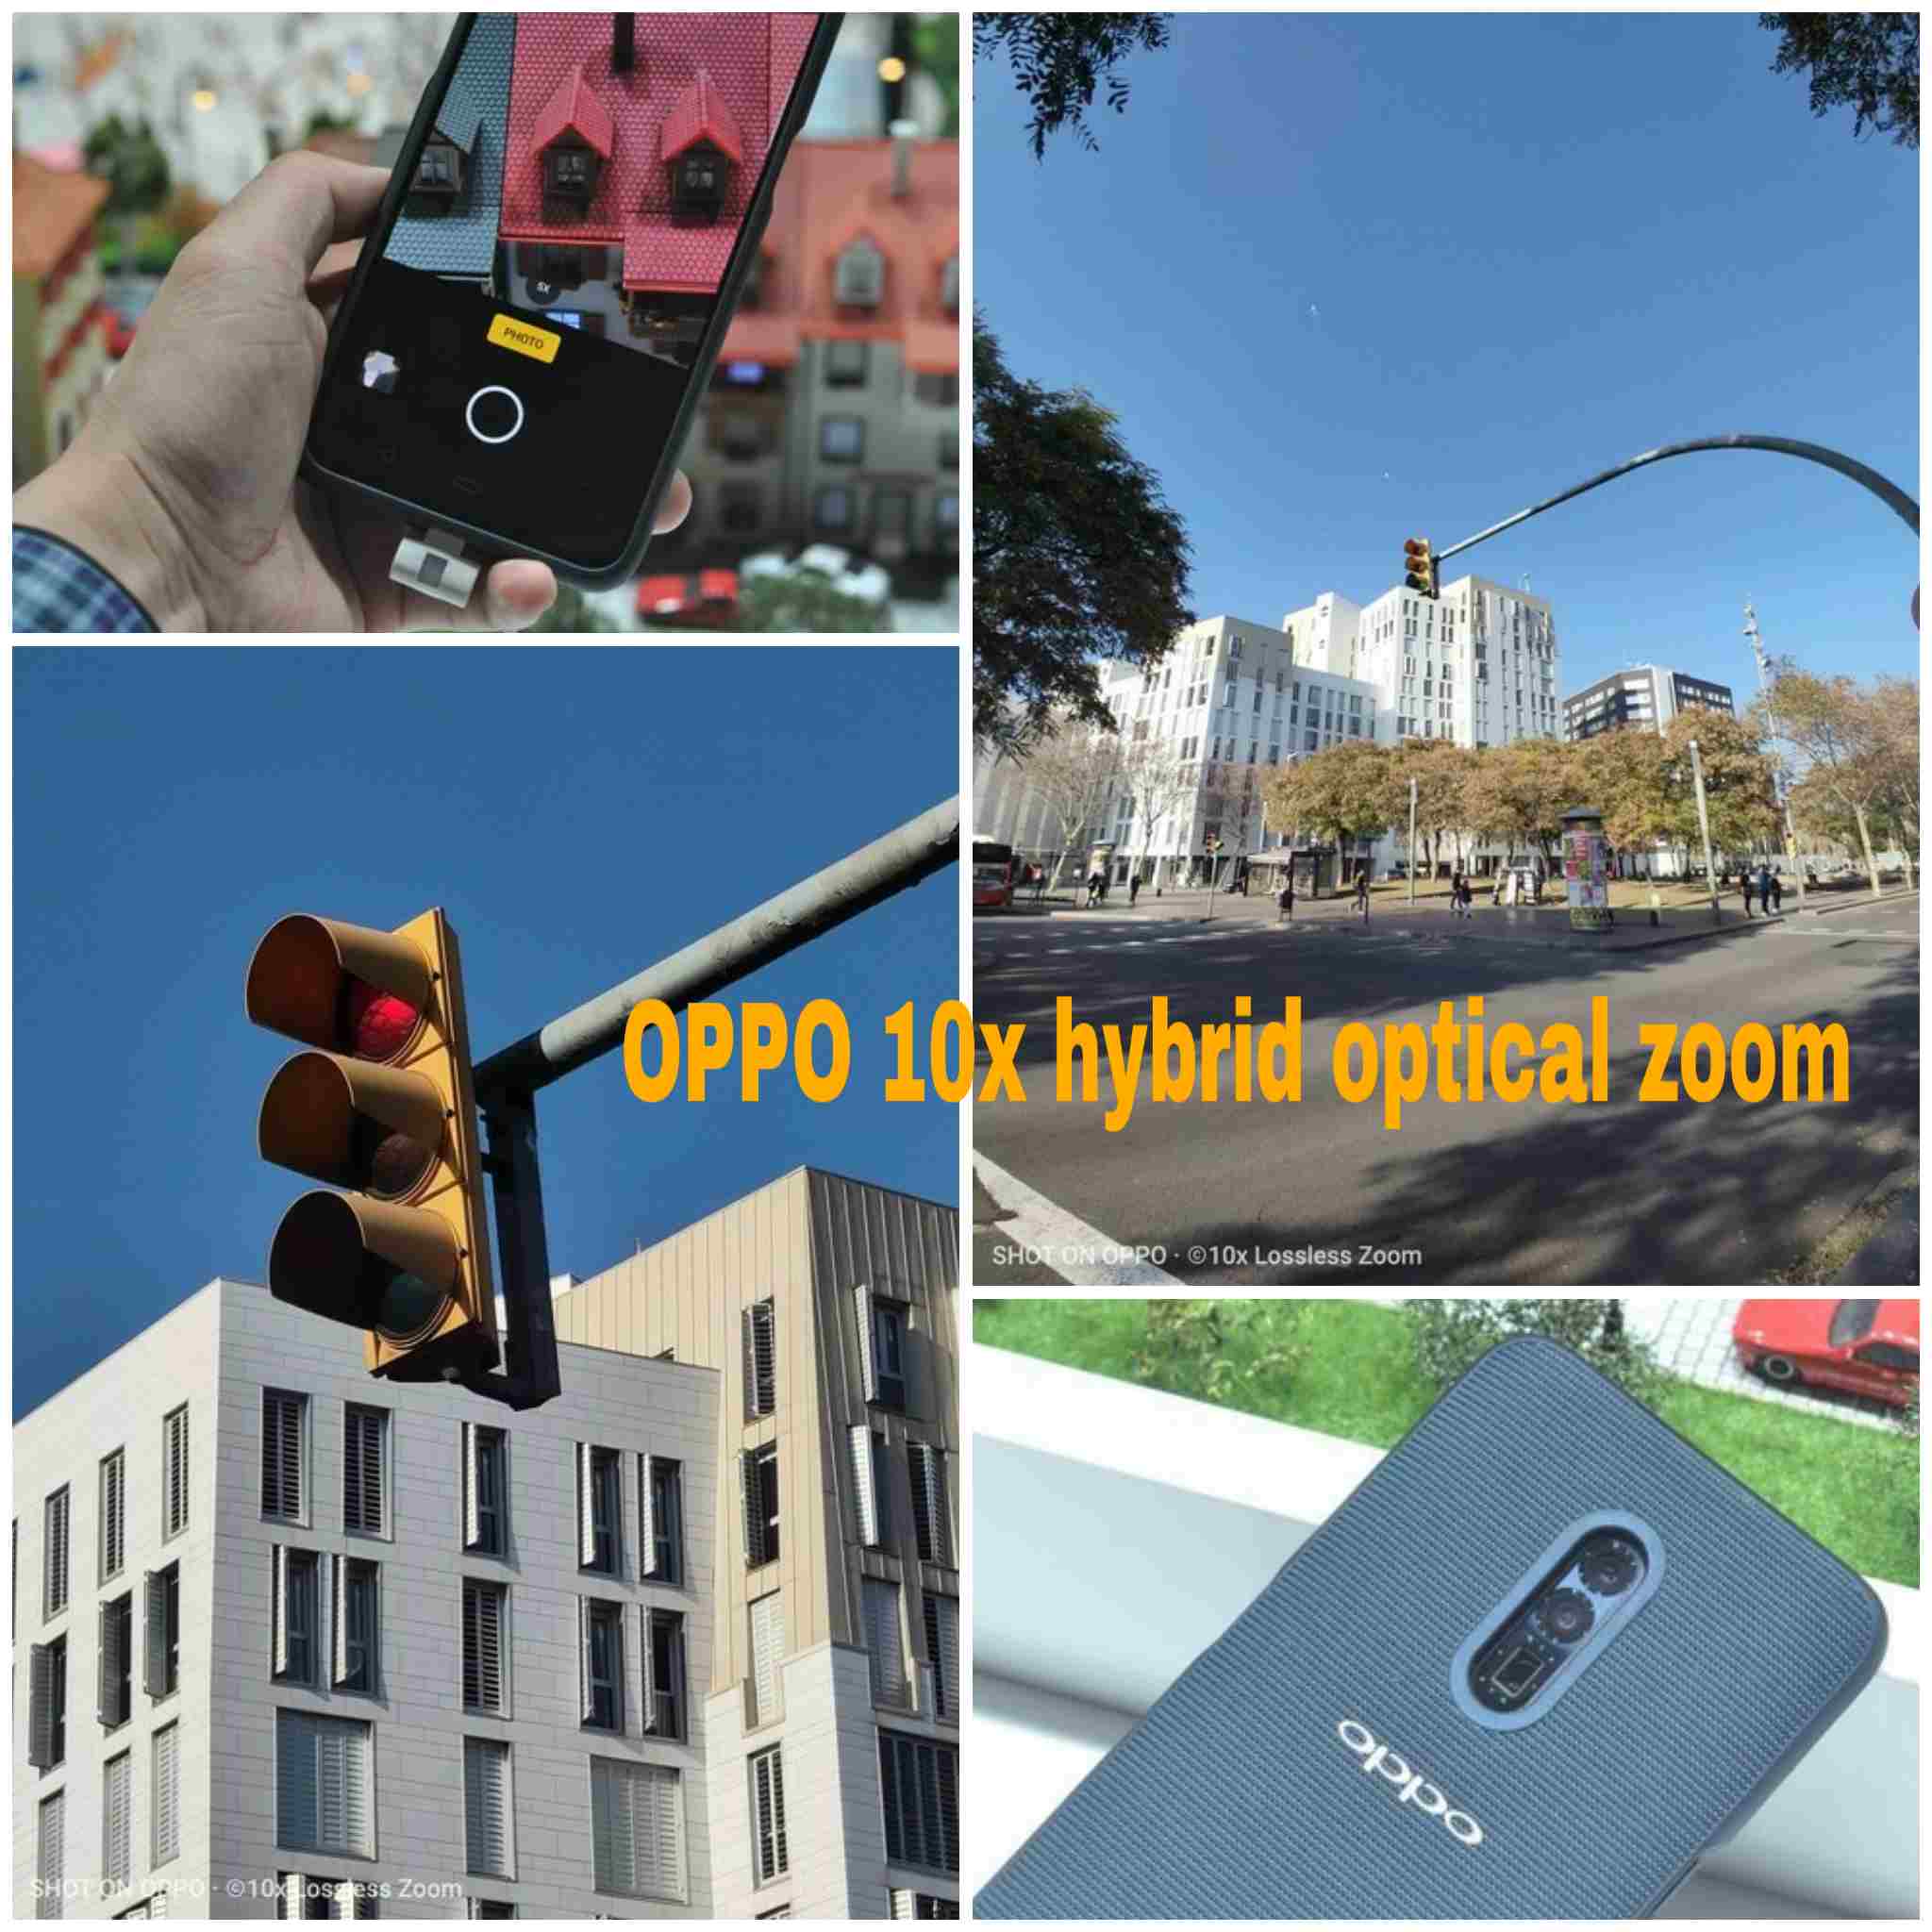 How strong is the OPPO 10x hybrid optical zoom? Let’s check it out.